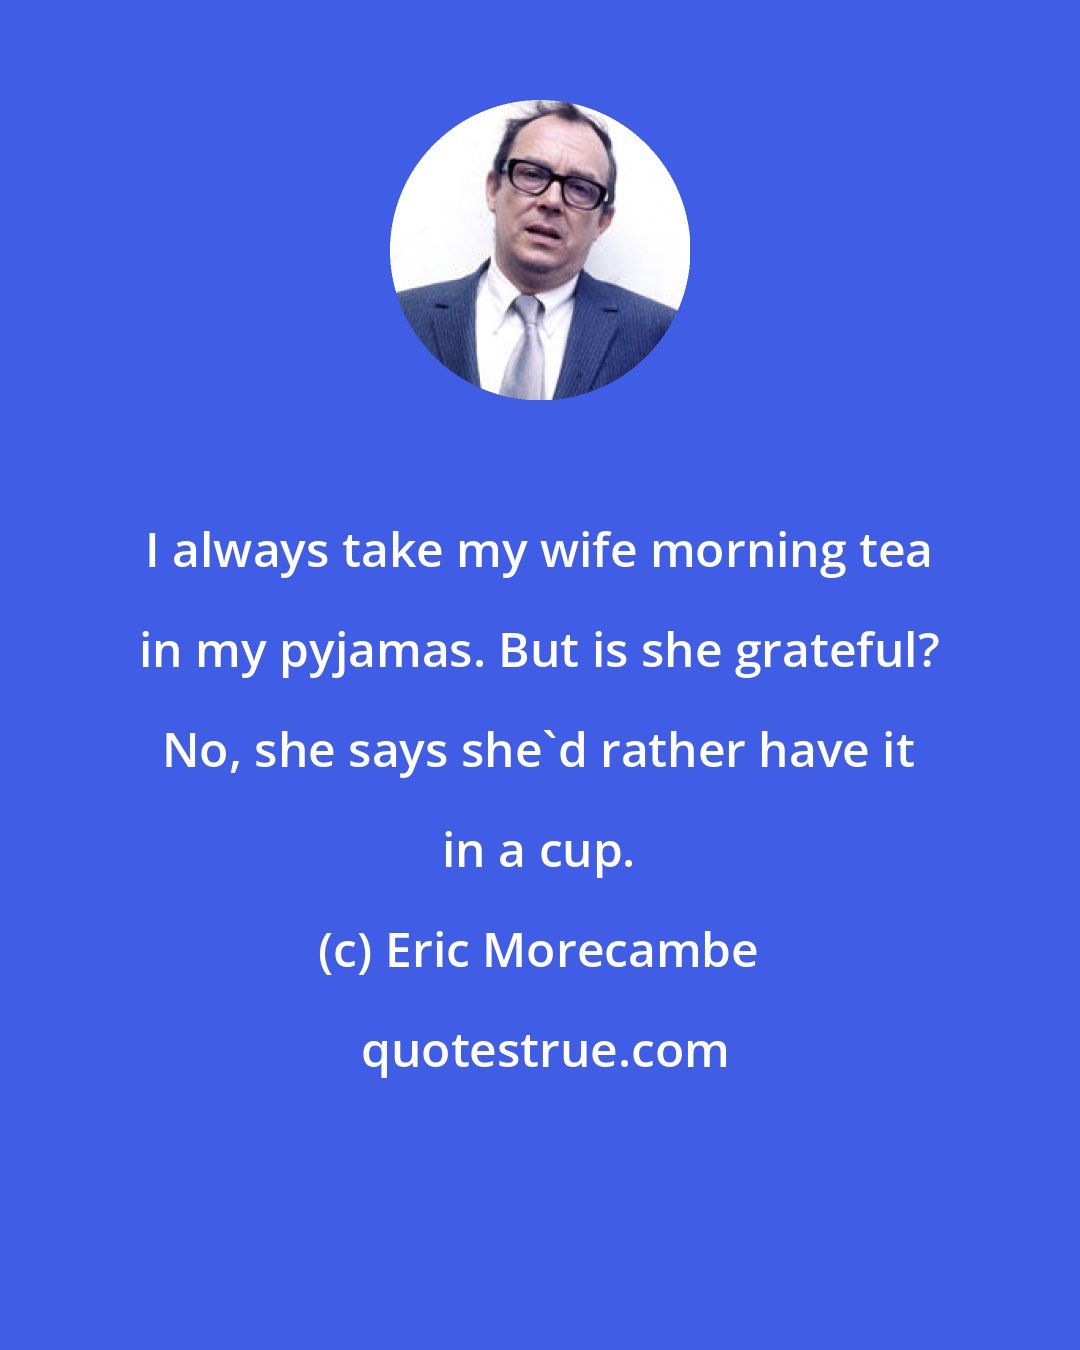 Eric Morecambe: I always take my wife morning tea in my pyjamas. But is she grateful? No, she says she'd rather have it in a cup.